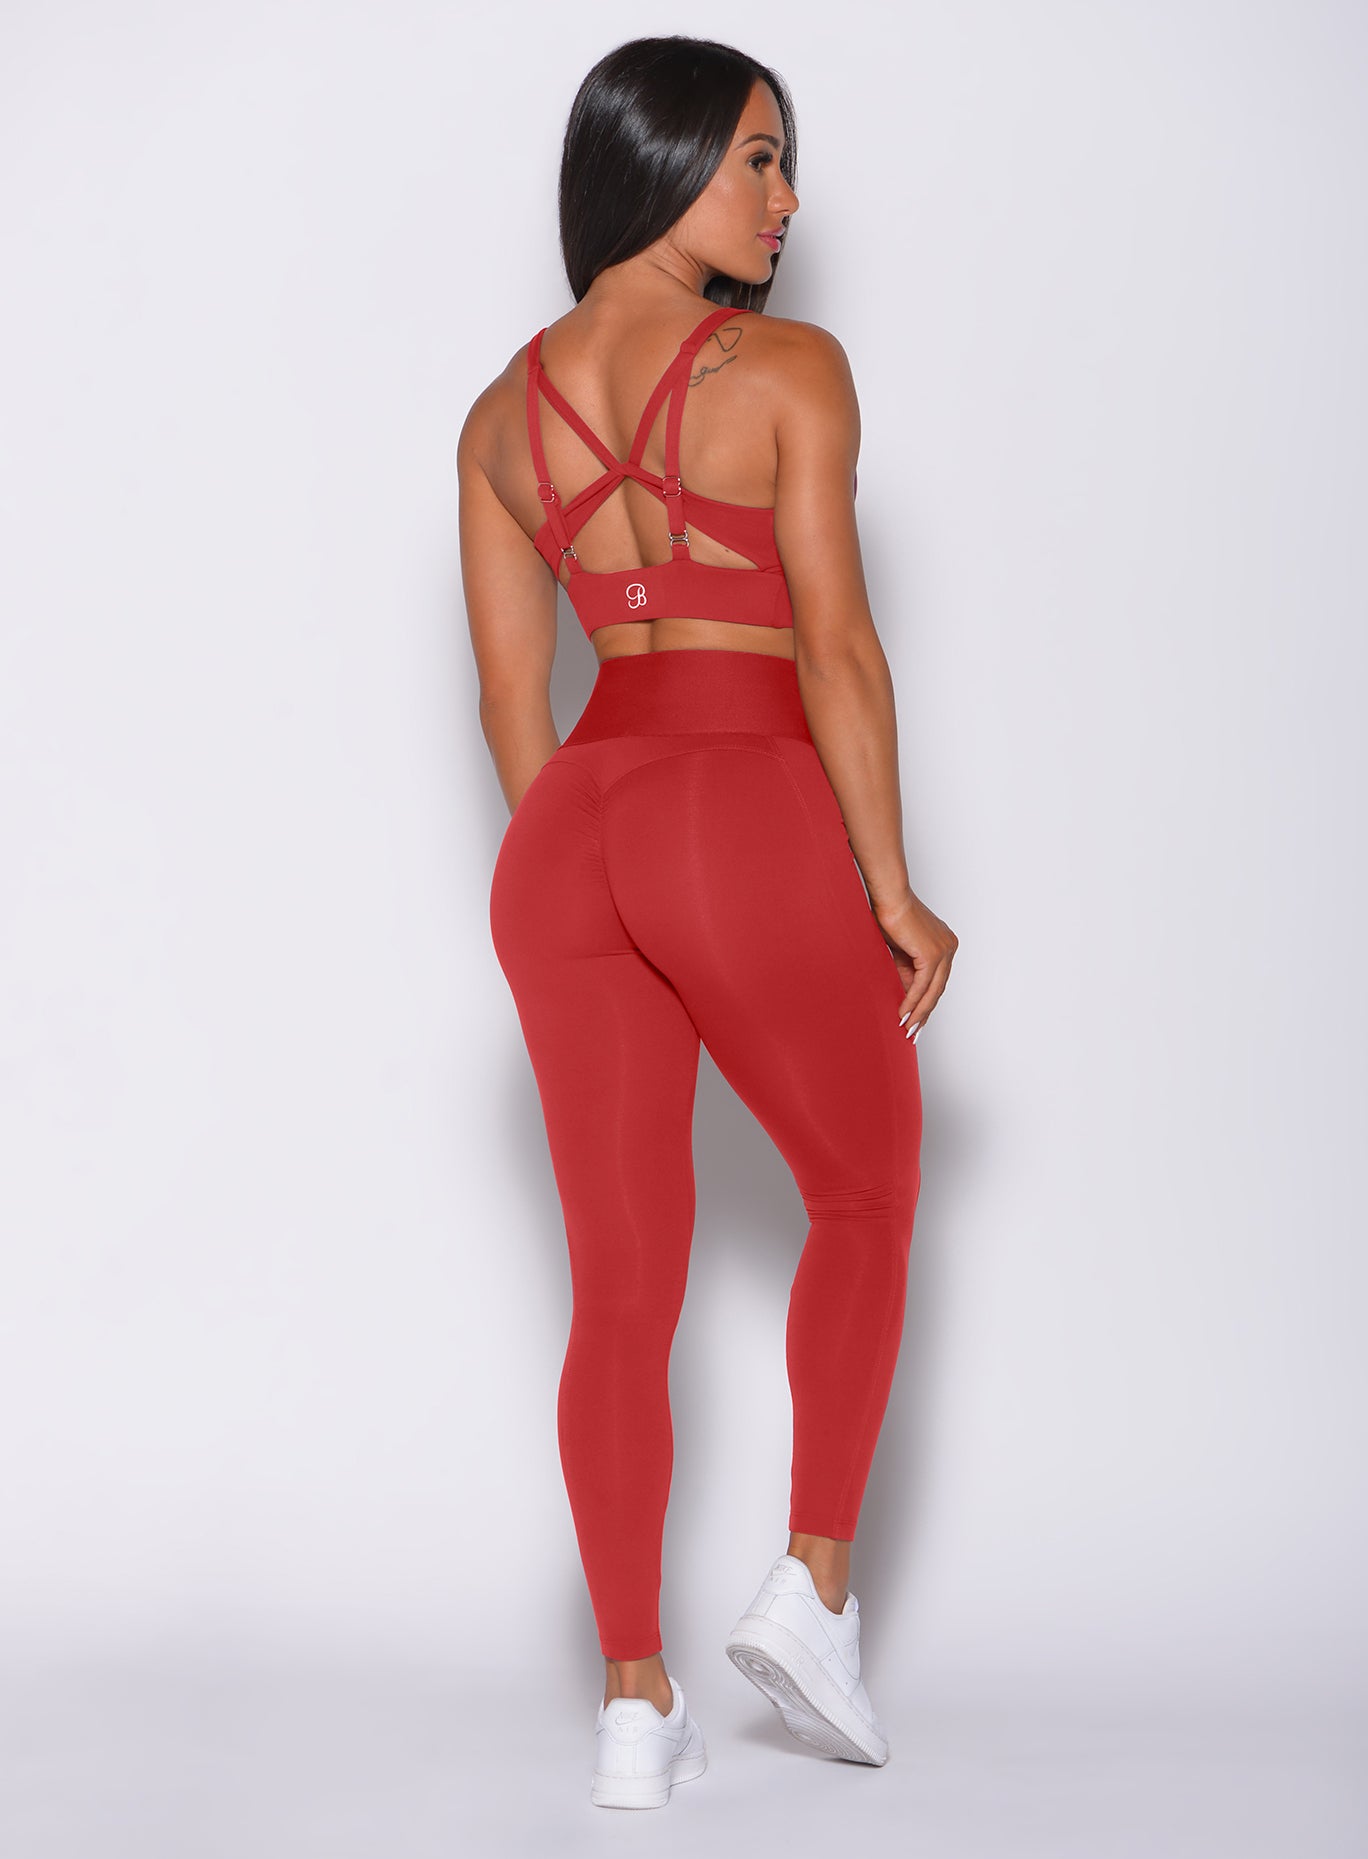 Back profile view of a model facing to her right wearing our impact sports bra in sunset red and a matching leggings